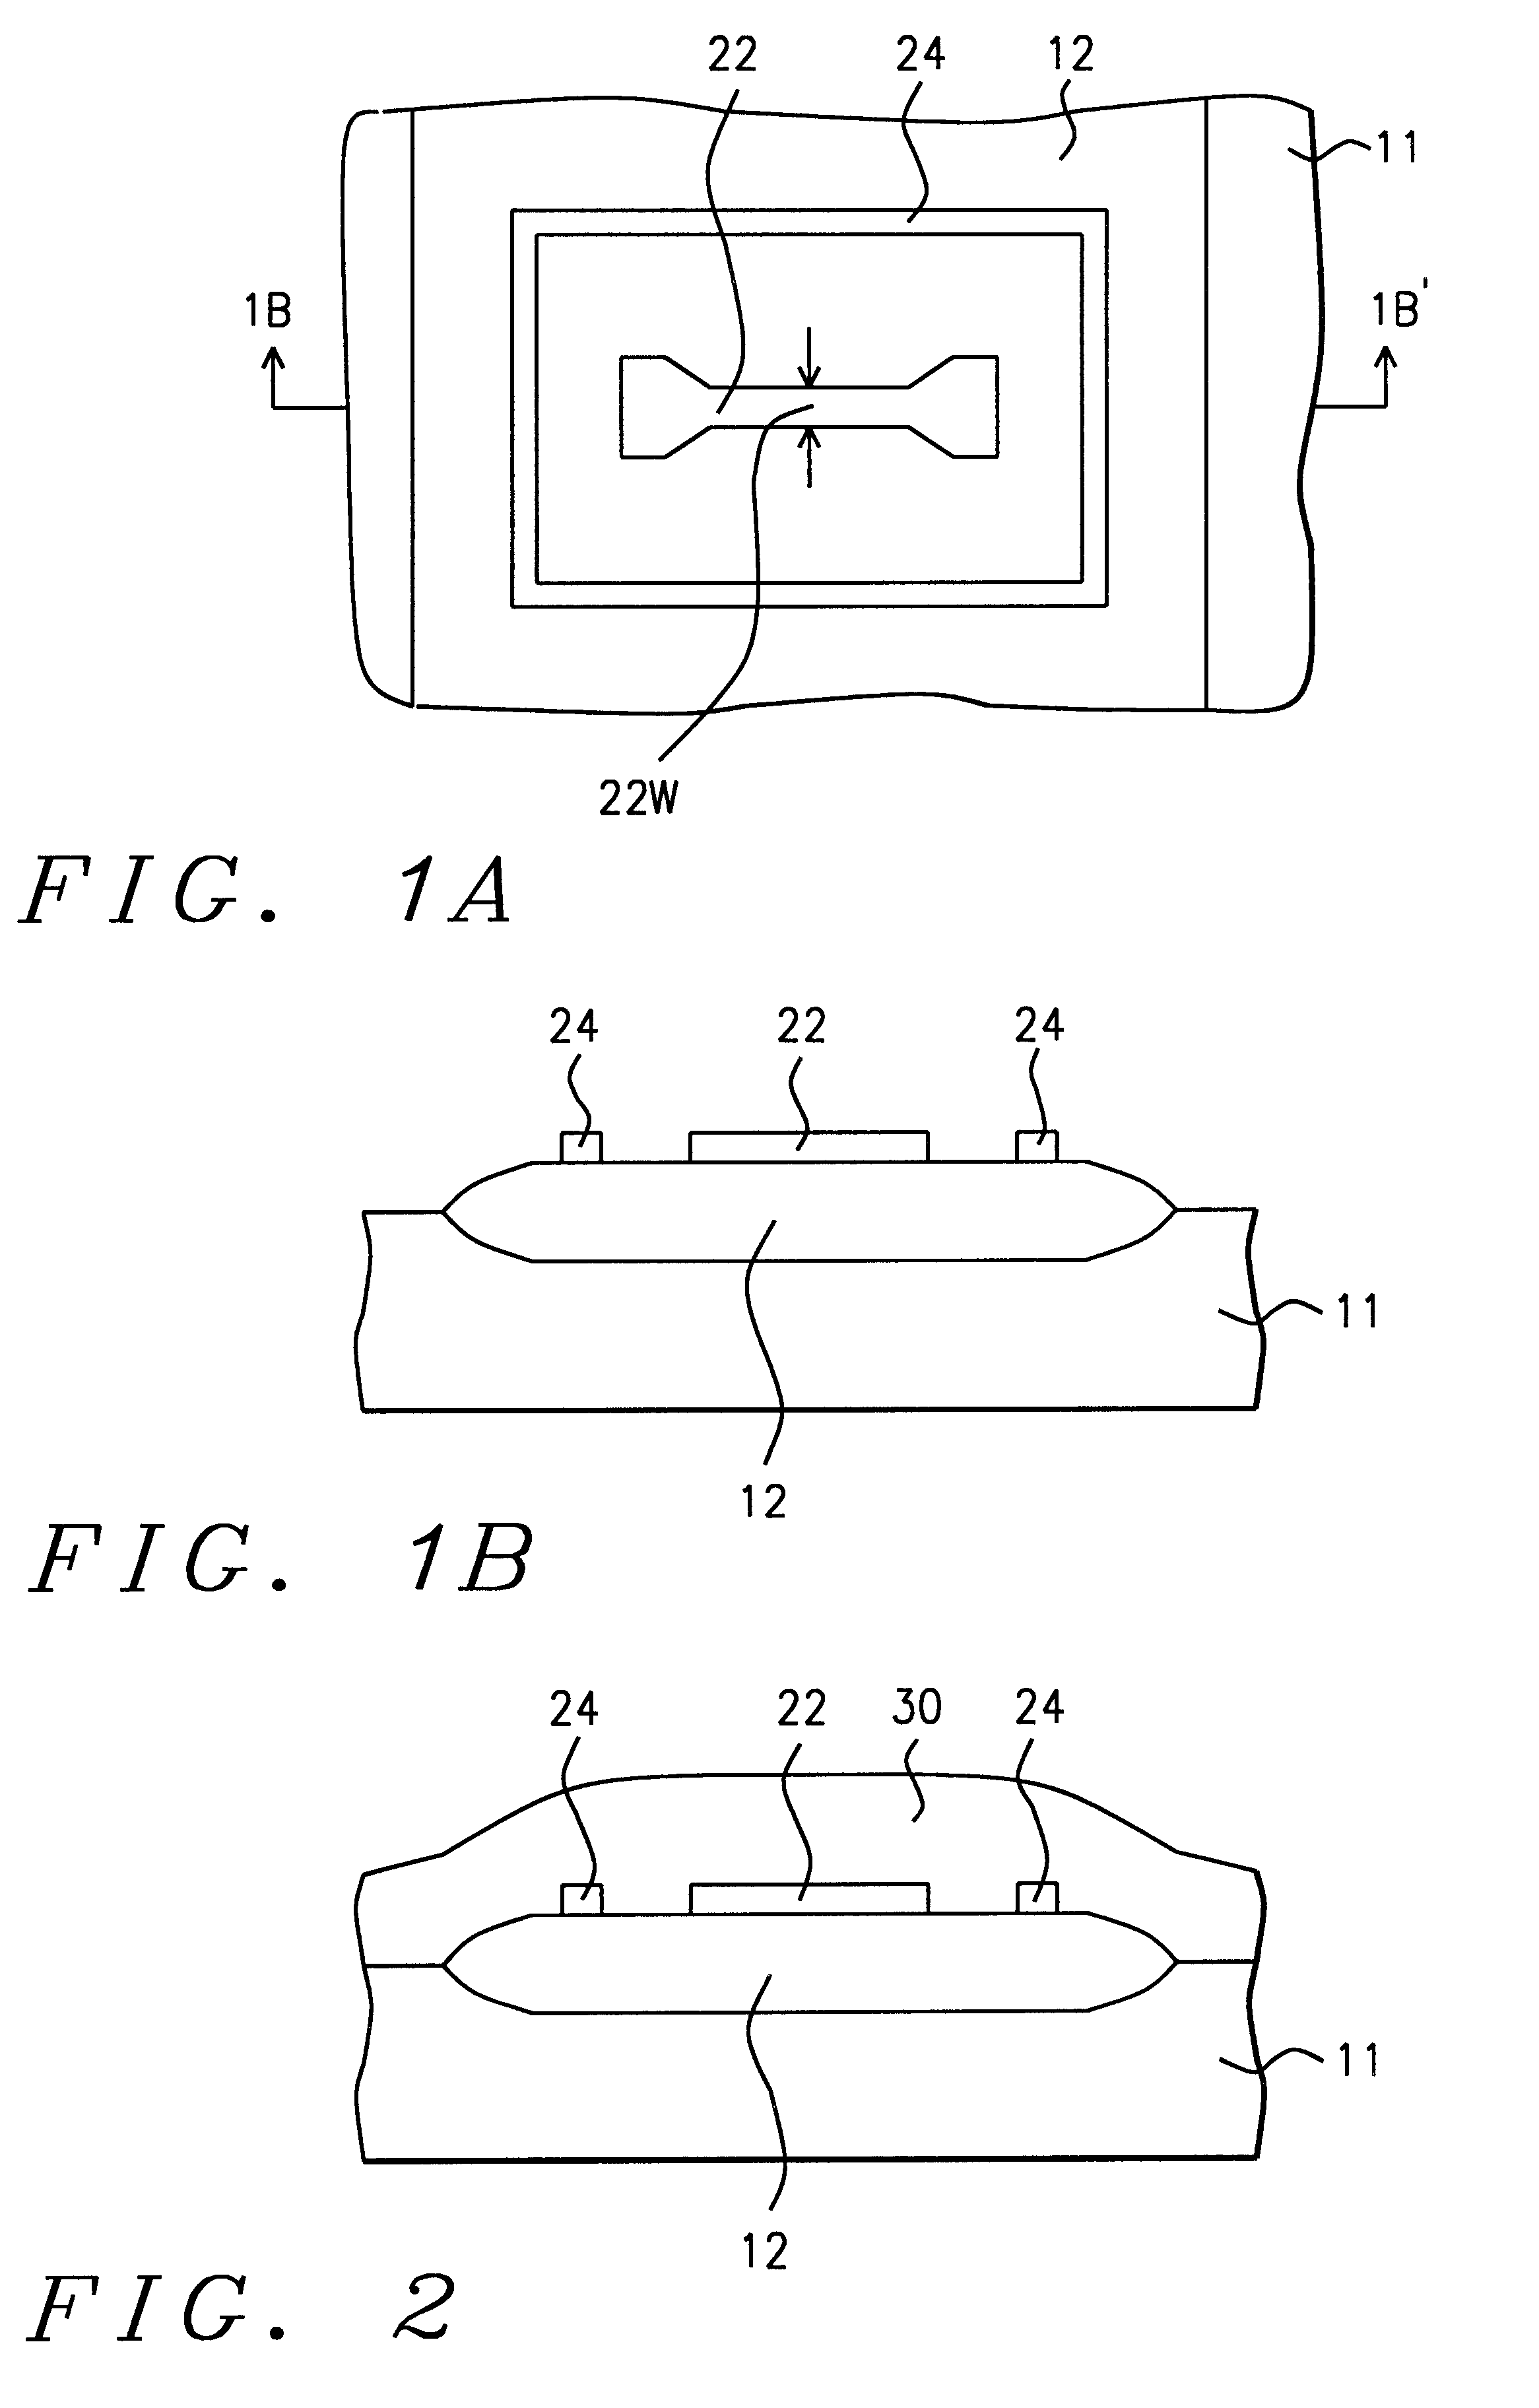 Method for forming a thin-film, electrically blowable fuse with a reproducible blowing wattage